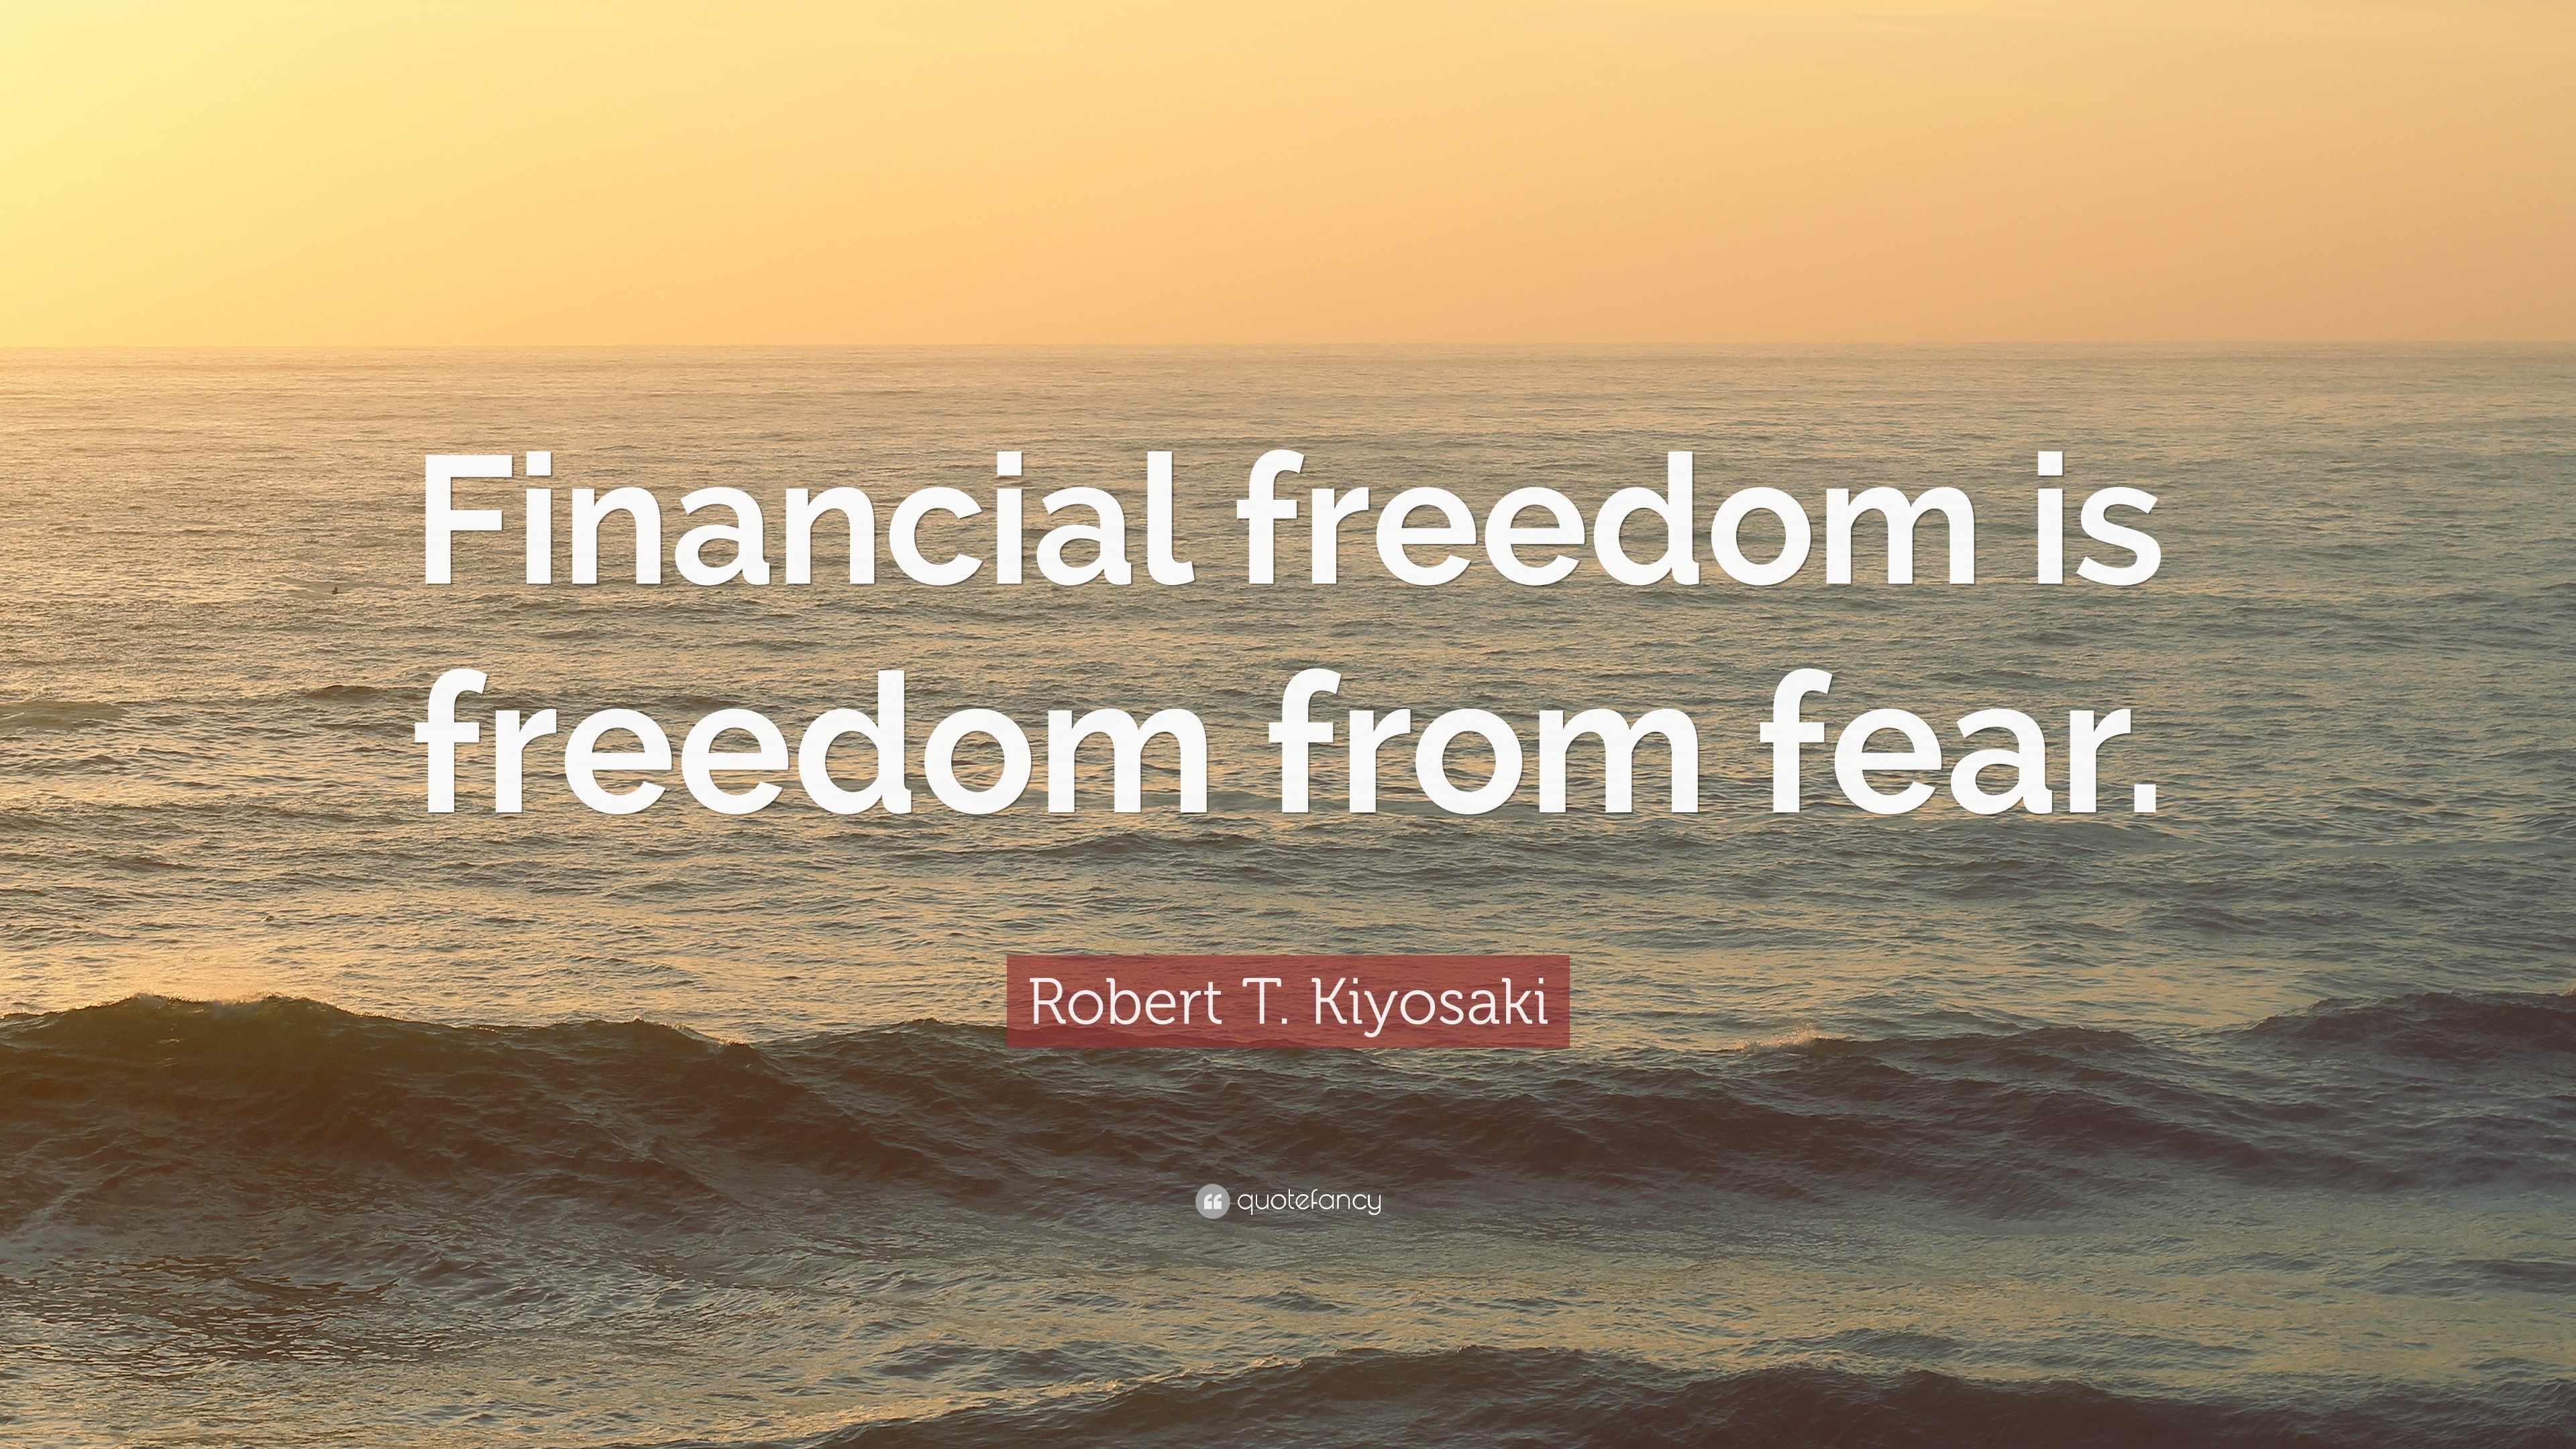 Financial Freedom Quotes Images : 50 Financial Freedom Quotes To